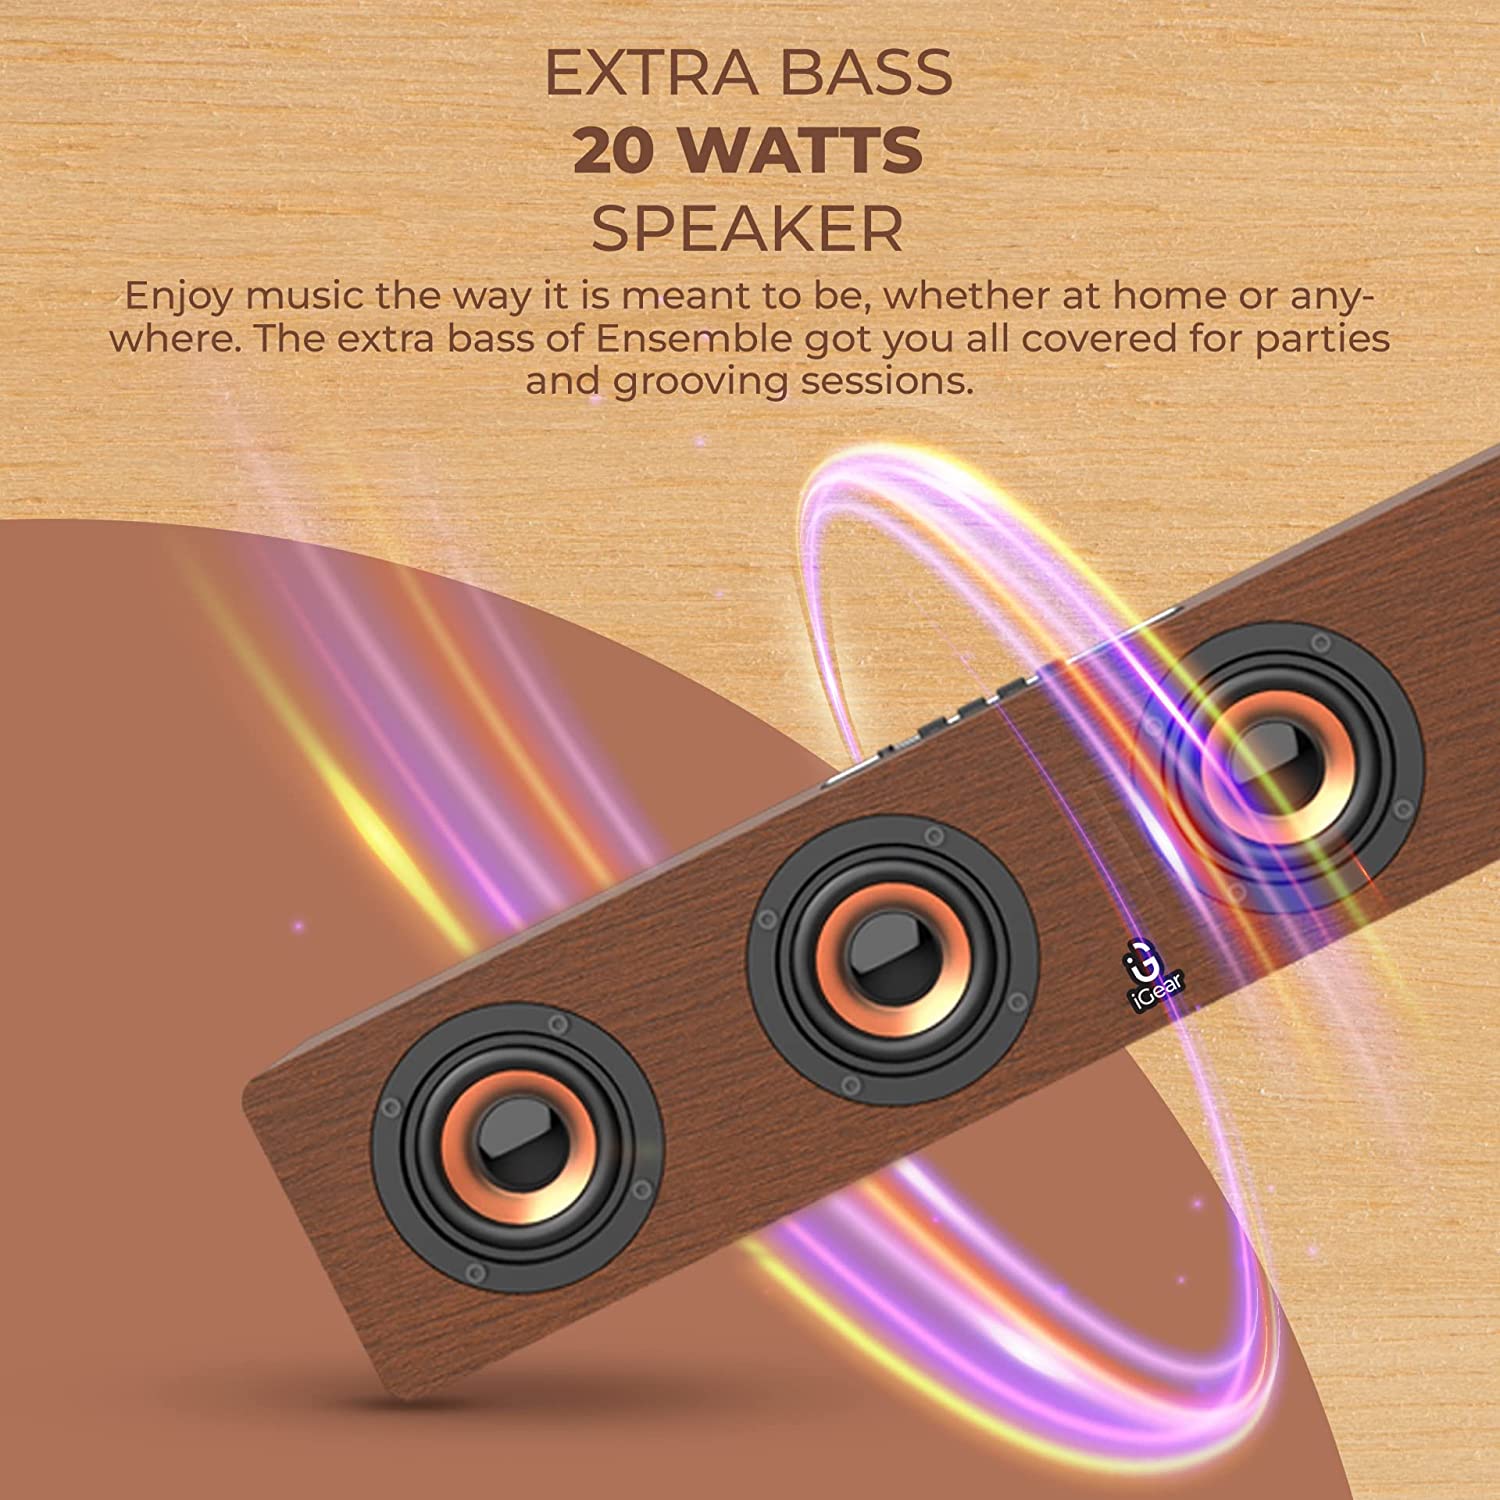 i GEAR 1130 Ensemble 20 watts Wooden Portable Soundbar with Wireless Bluetooth connectivity, Rechargeable, with USB/TF Card Support, FM Mode and Sub-woofer for Extra Bass - Mahajan Electronics Online